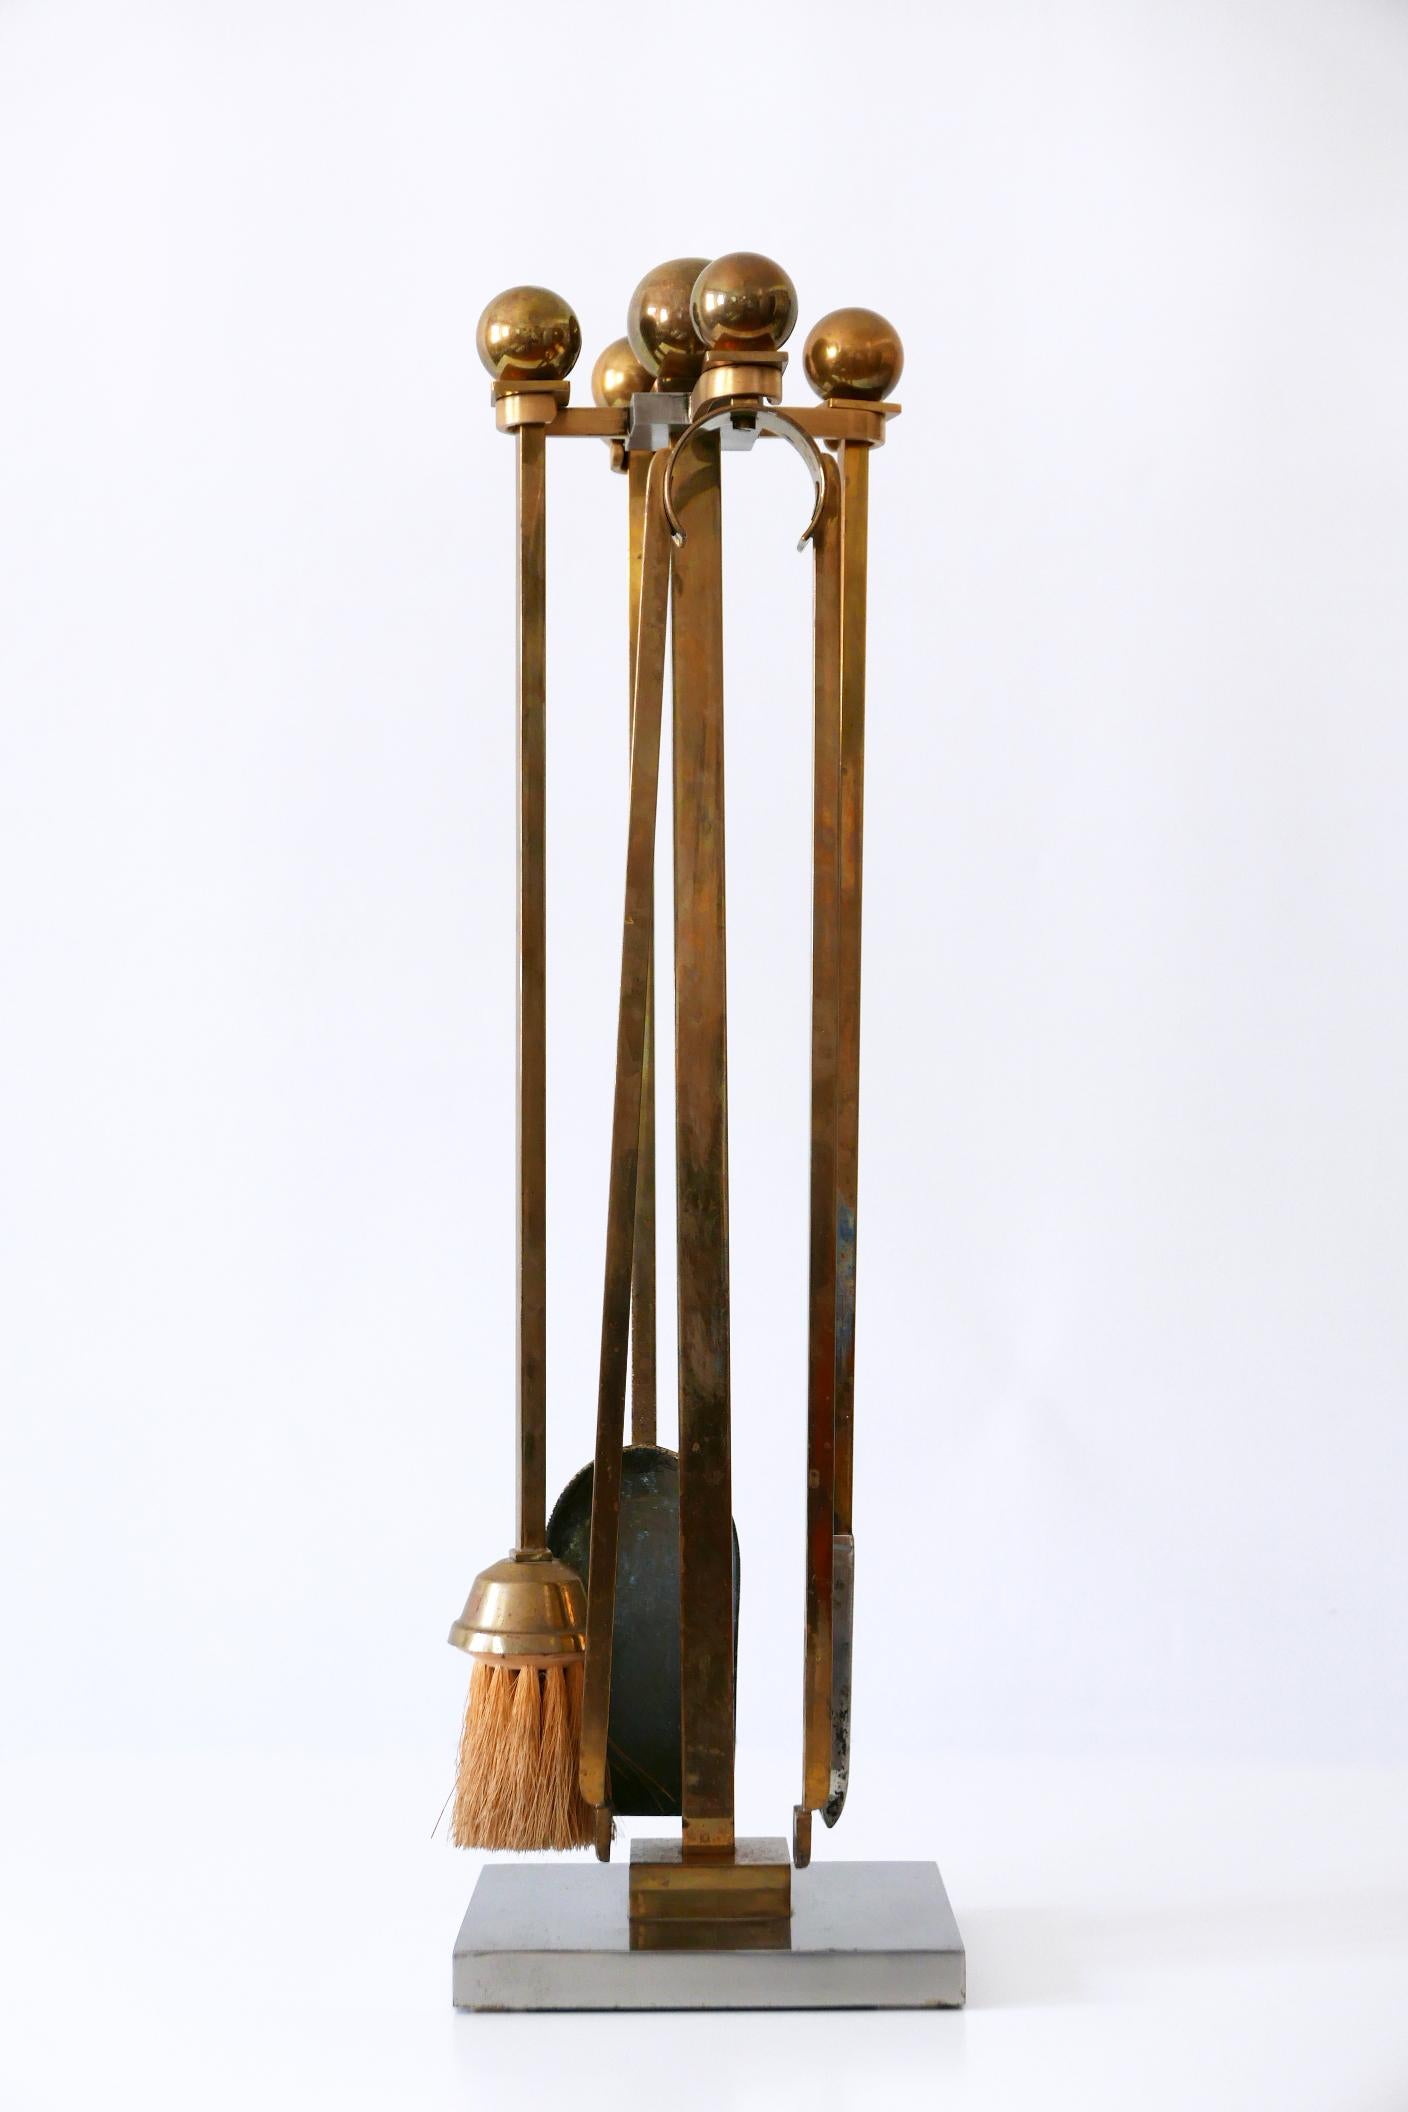 Exceptional Mid-Century Modern Brass and Steel Fireplace Tools 1970s For Sale 6